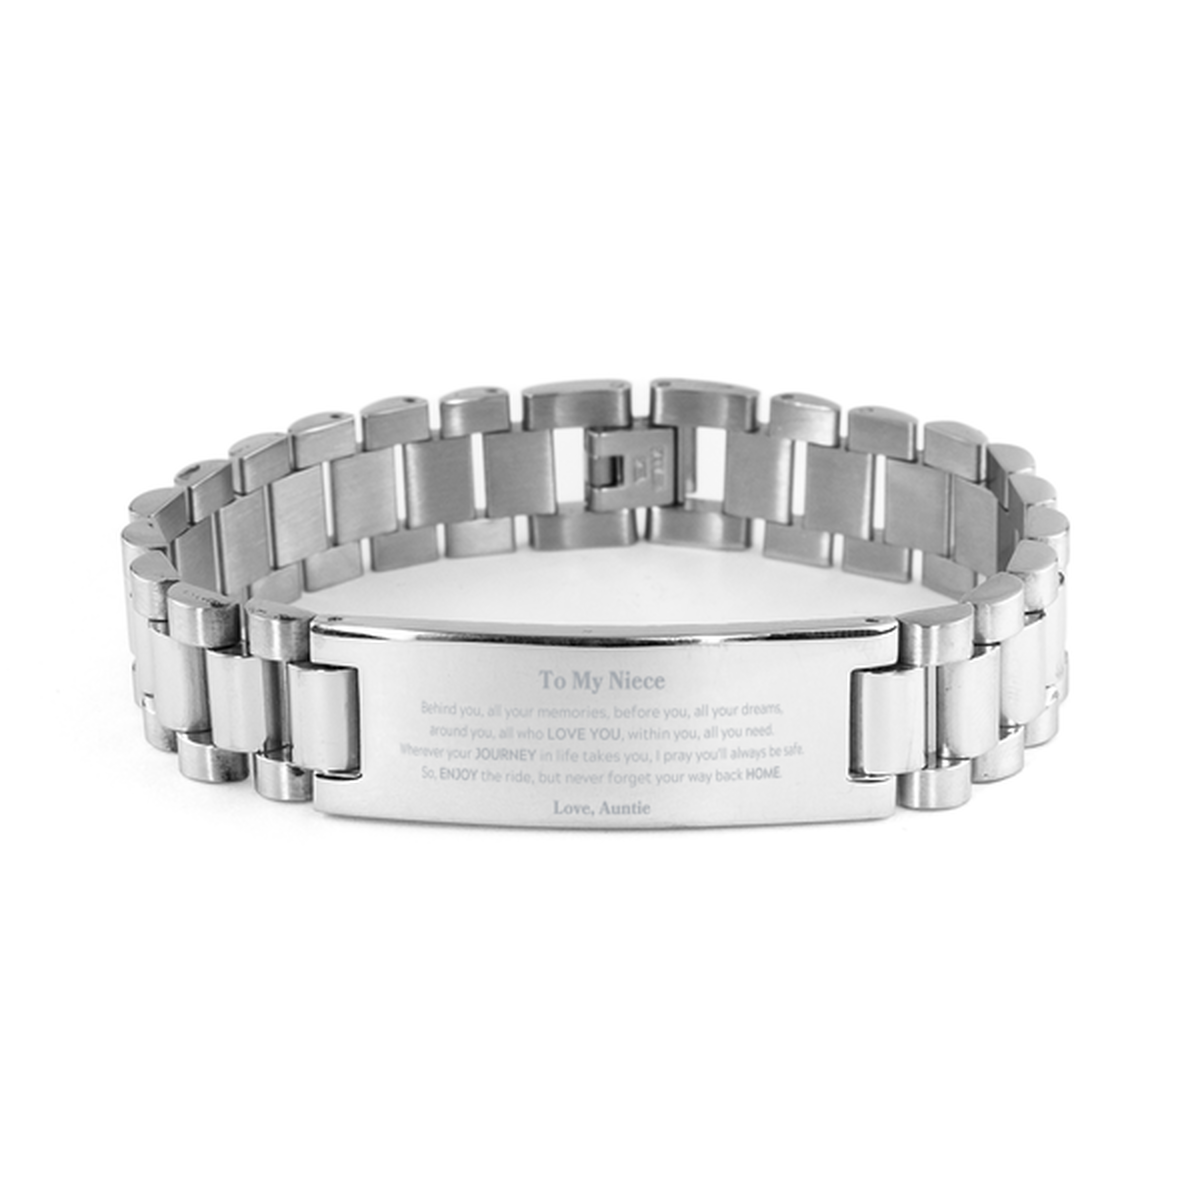 To My Niece Graduation Gifts from Auntie, Niece Ladder Stainless Steel Bracelet Christmas Birthday Gifts for Niece Behind you, all your memories, before you, all your dreams. Love, Auntie